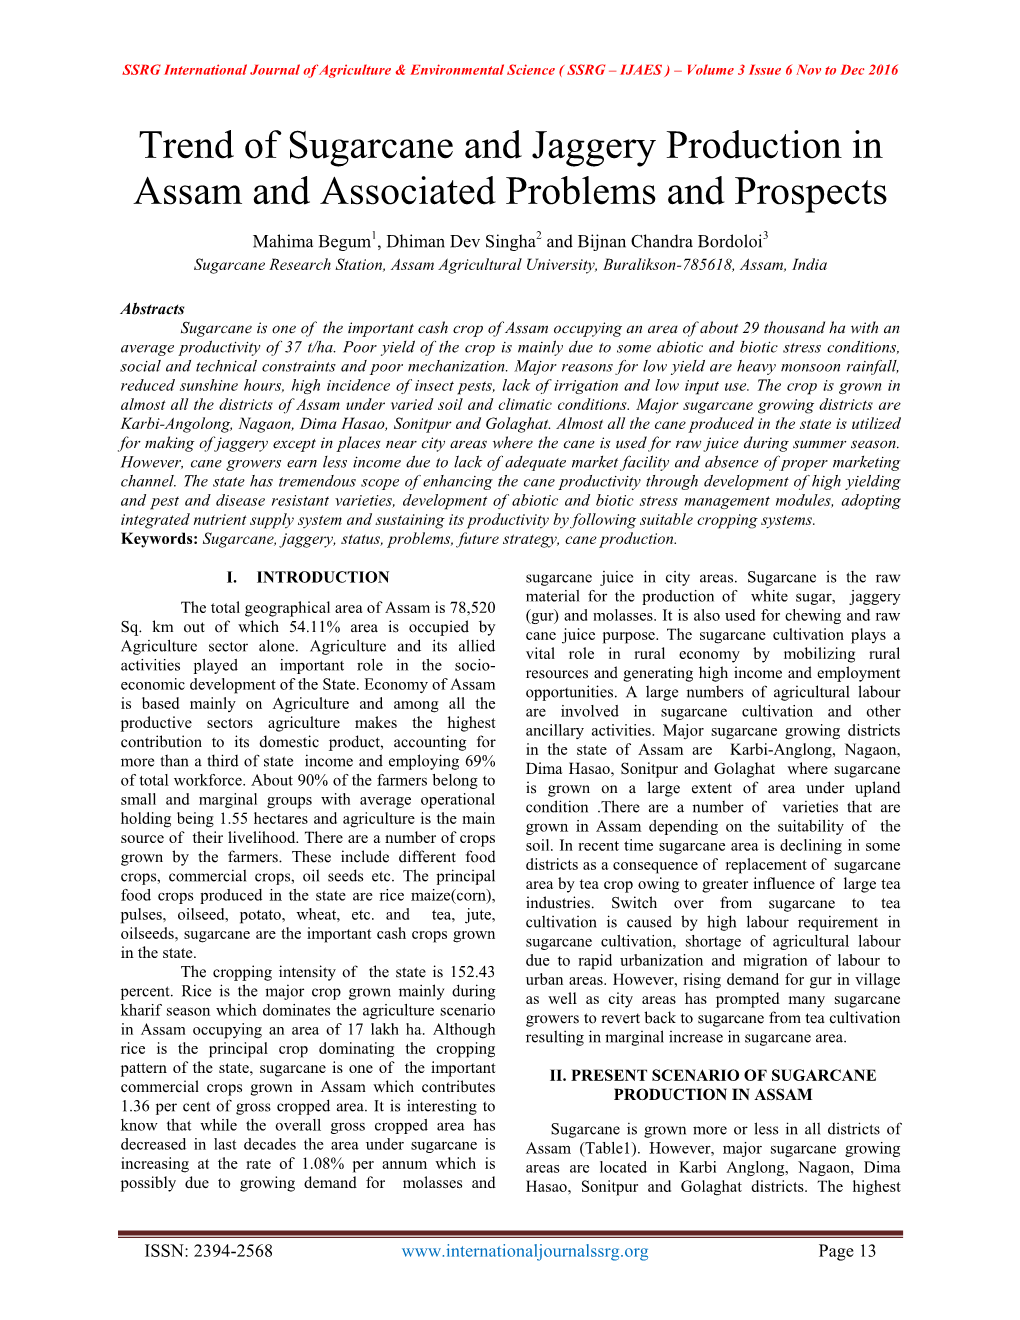 Trend of Sugarcane and Jaggery Production in Assam and Associated Problems and Prospects